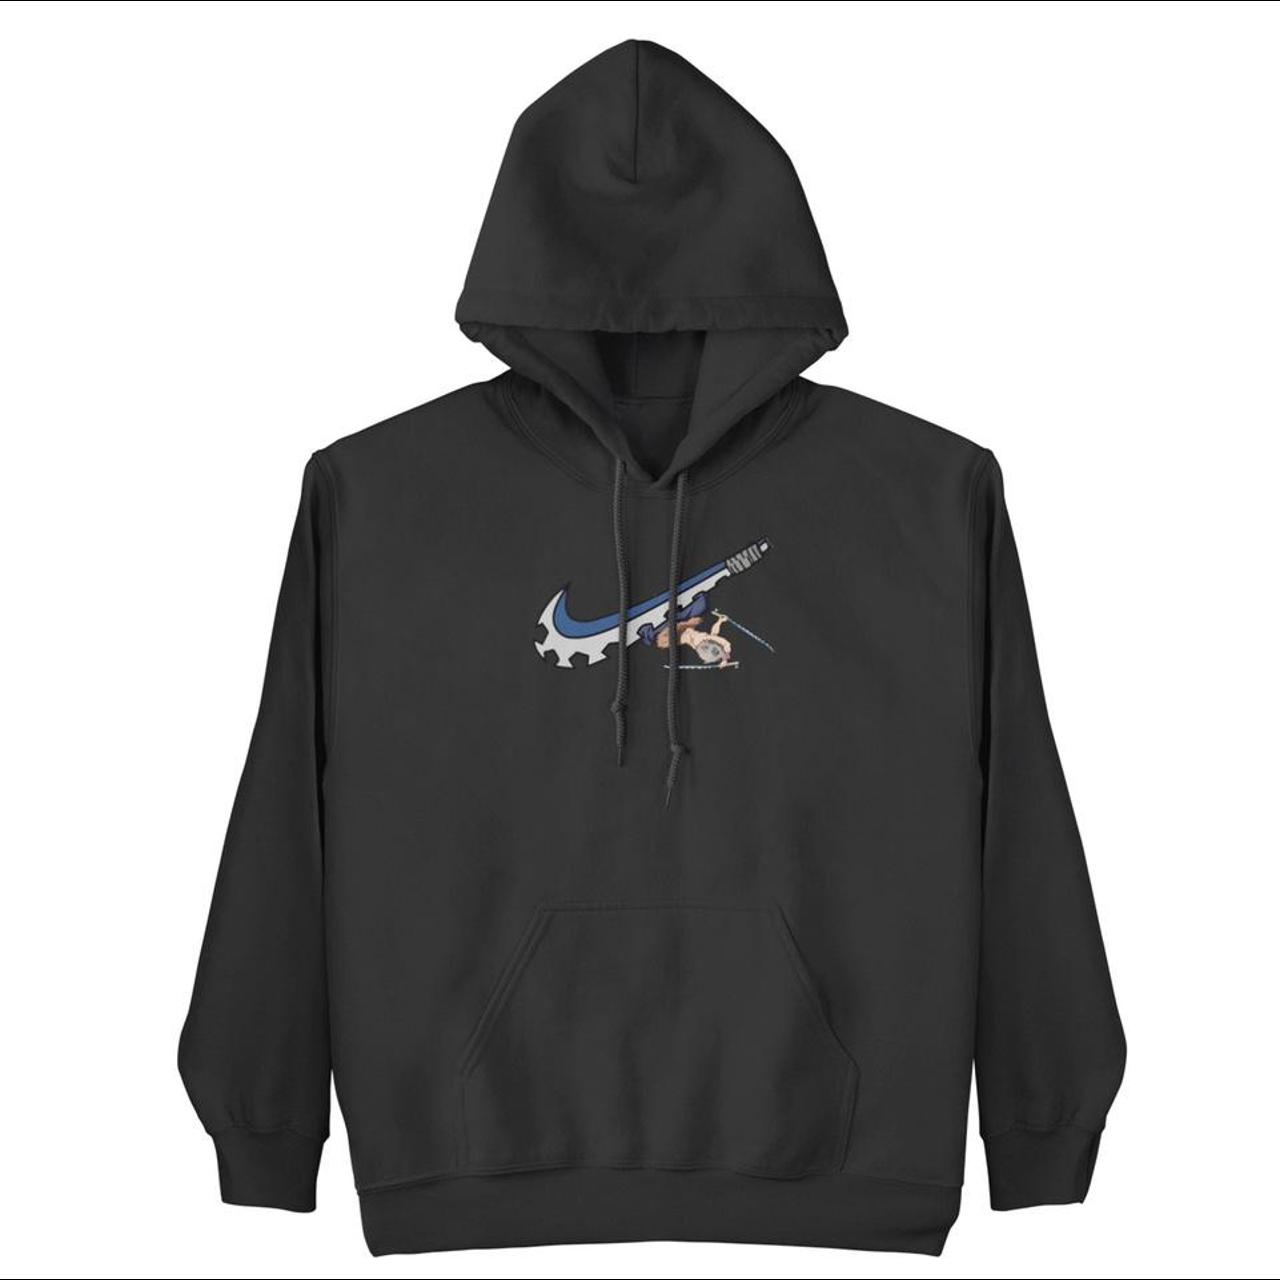 Baki Embroidered Anime Hoodie  TerraBell Designs